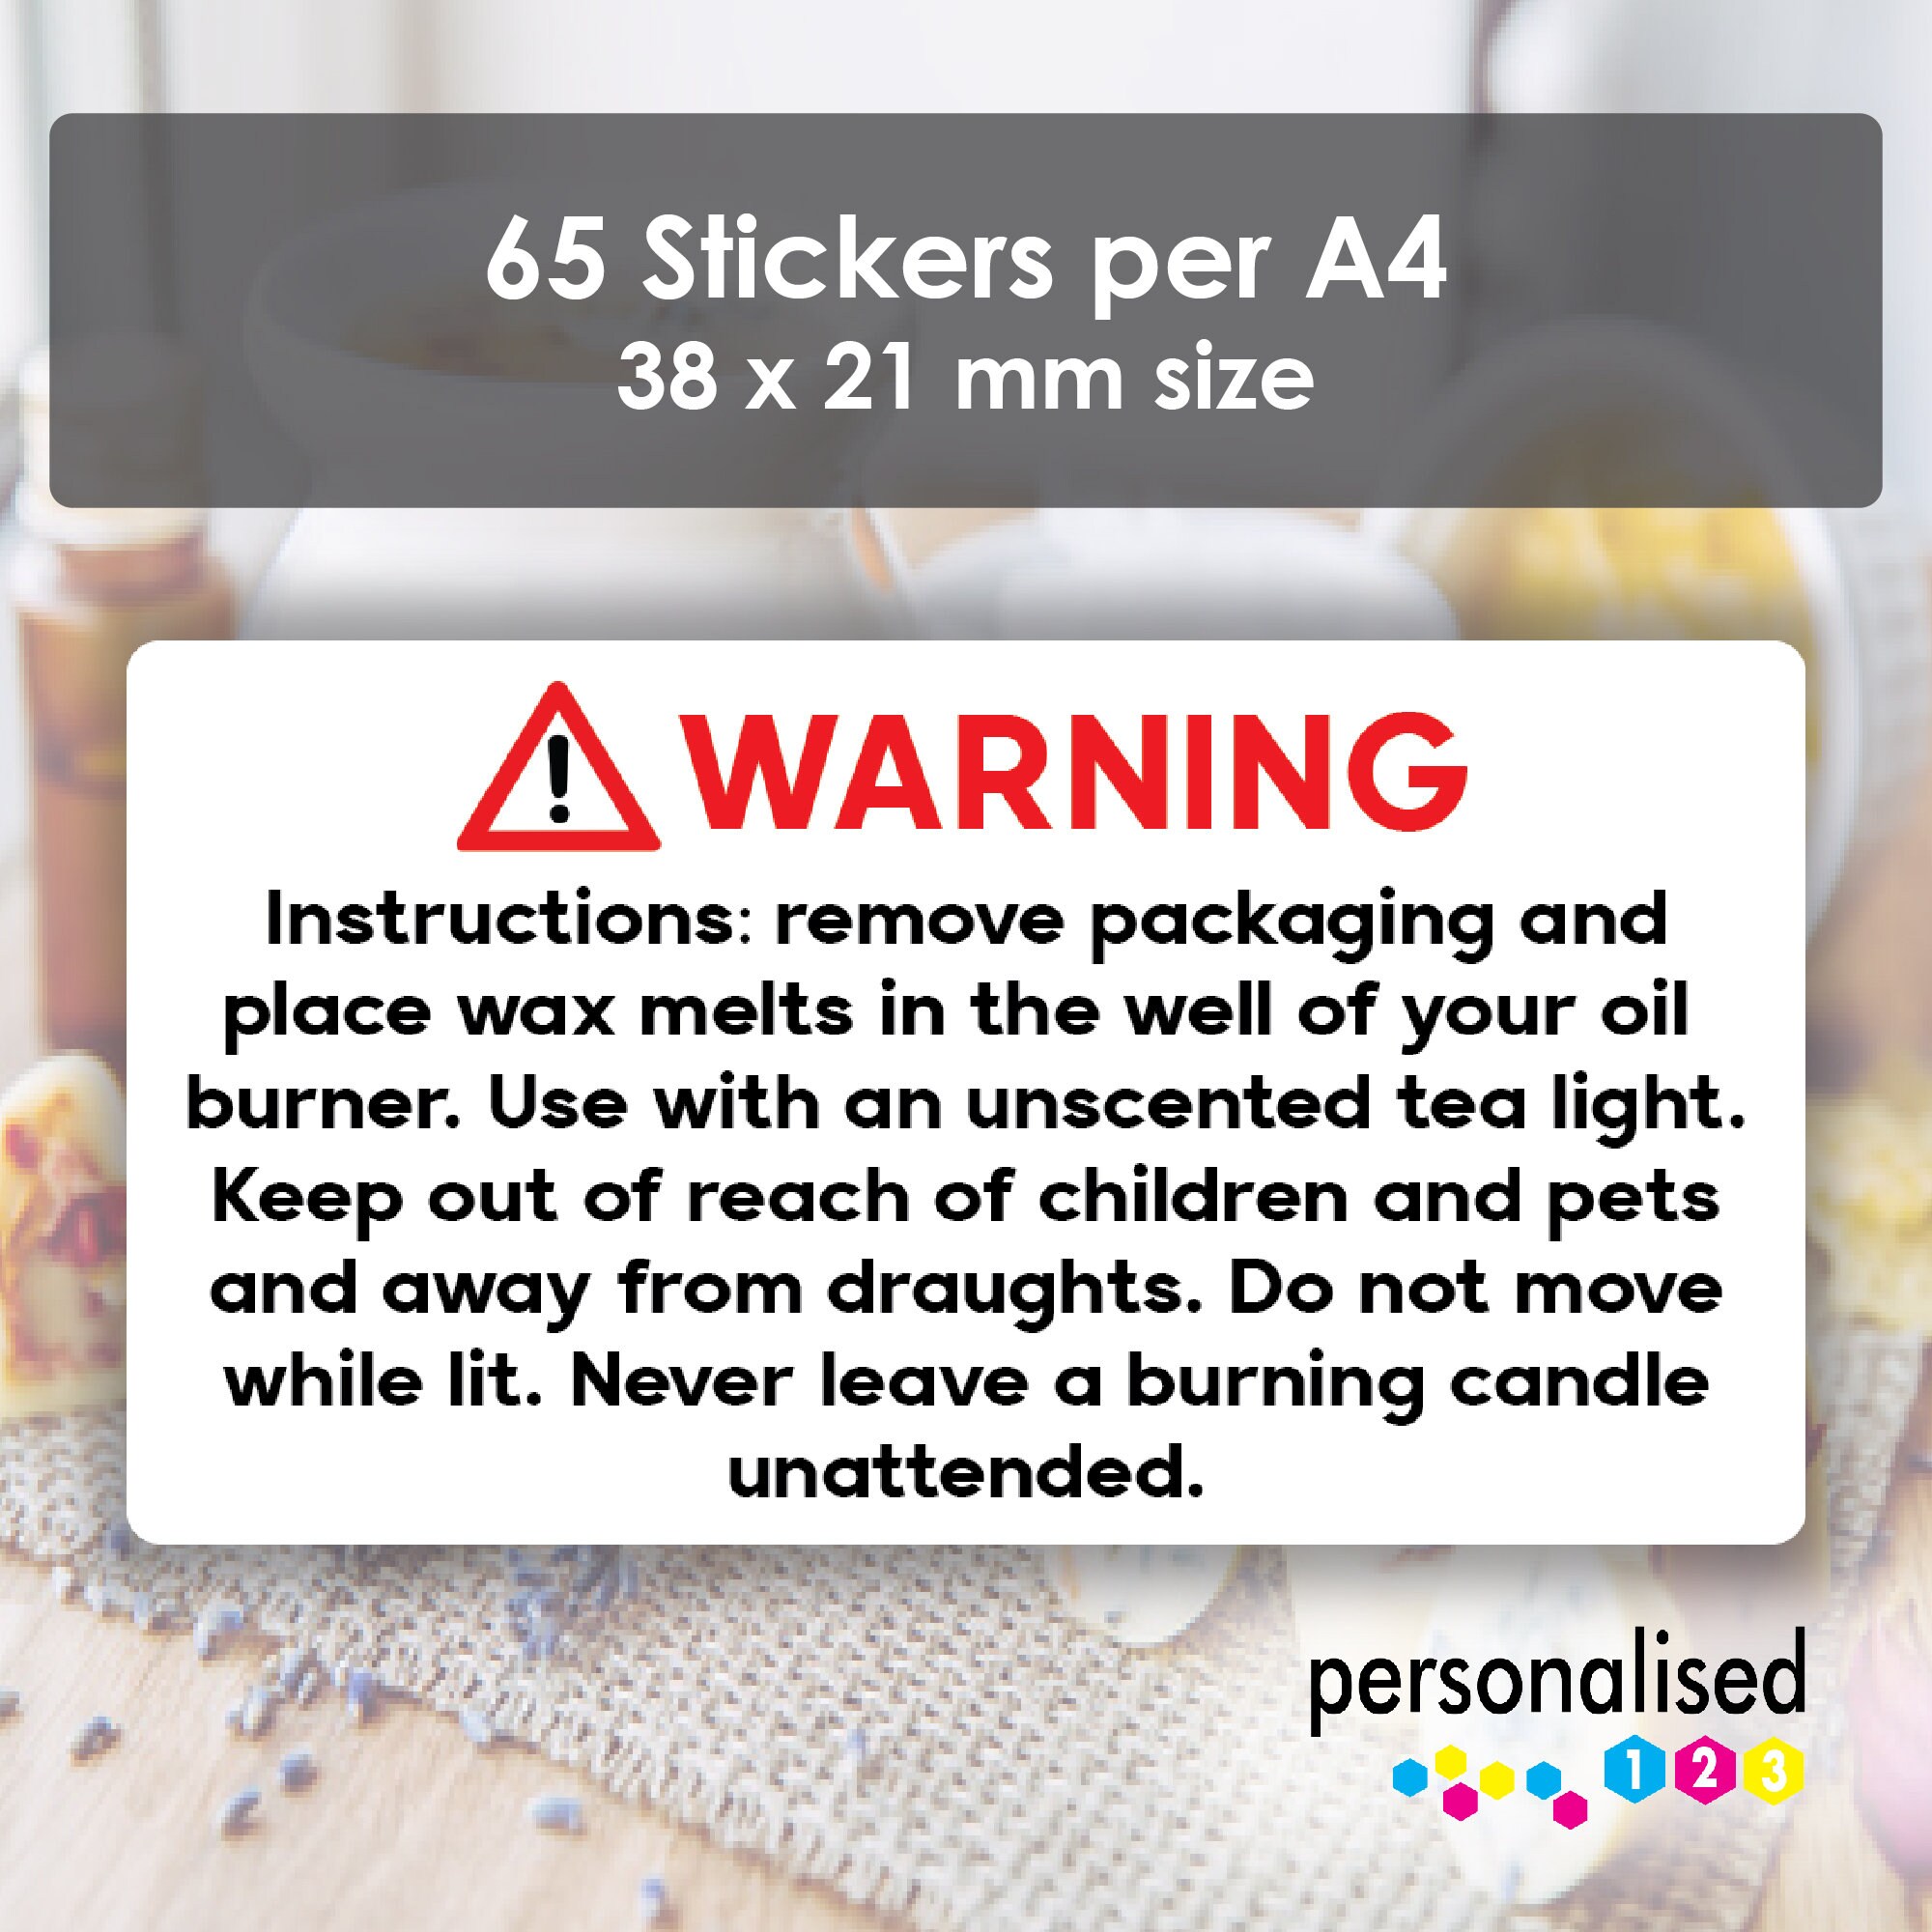 260 x WAX MELT SAFETY STICKERS LABELS WARNING INSTRUCTIONS REQUIRED BY LAW 